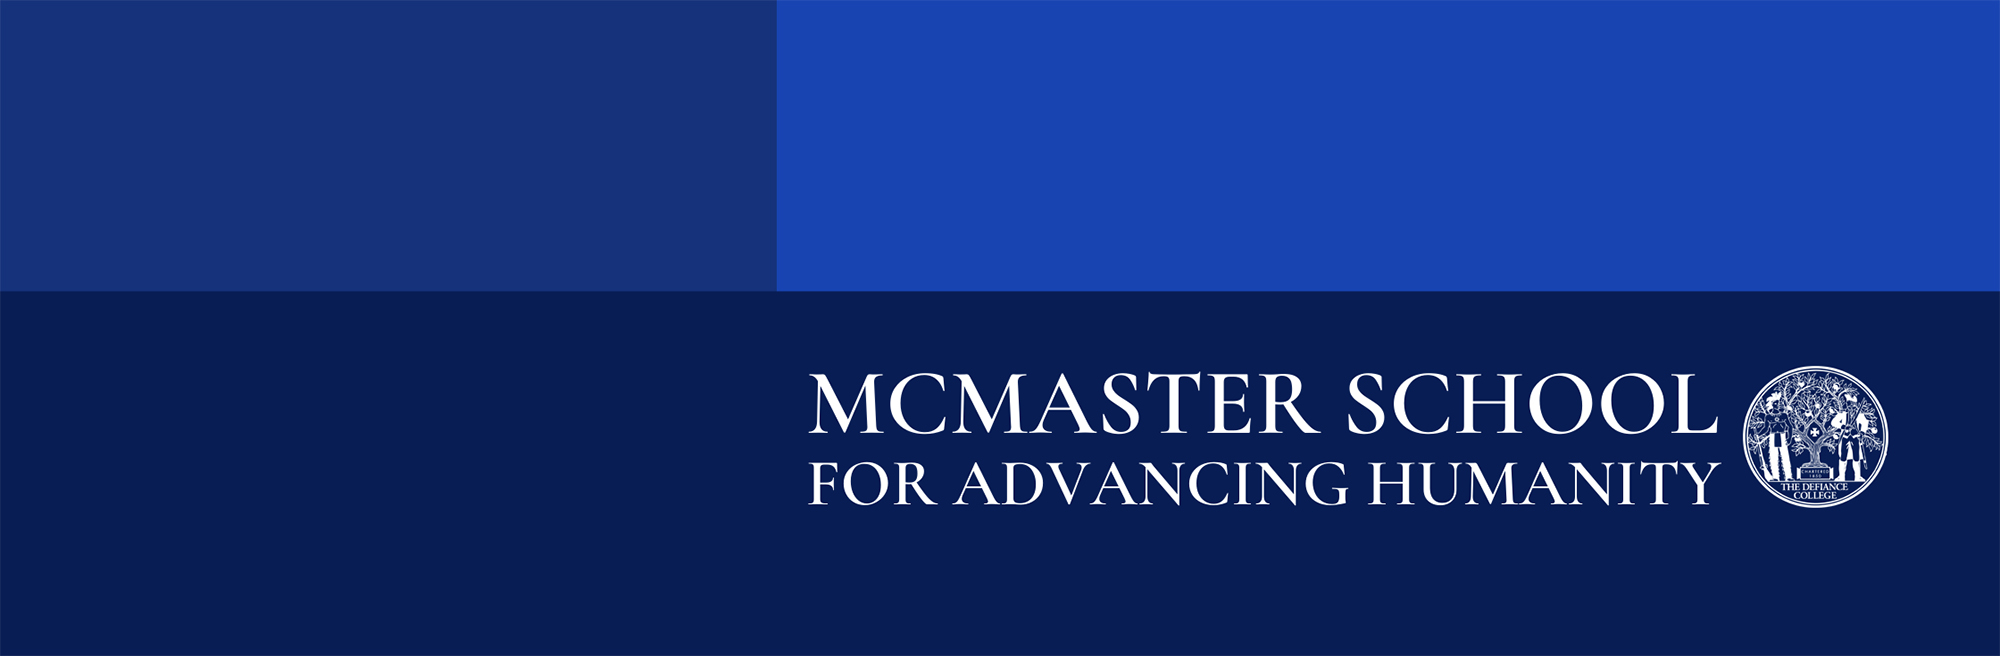 McMaster School for Advancing Humanity